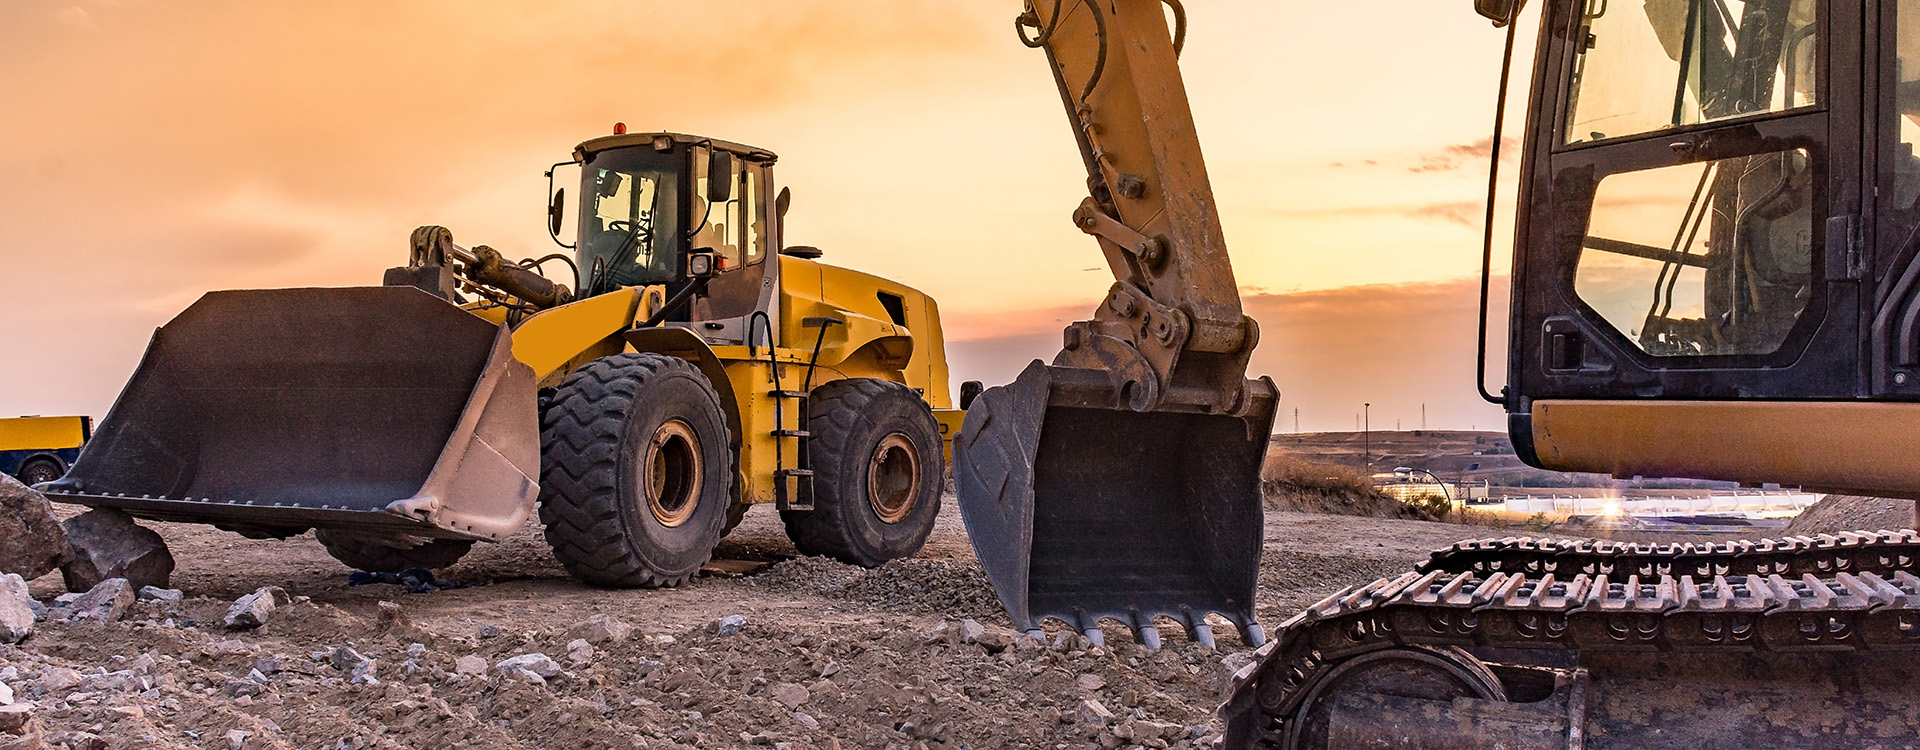 front loader and a back hoe equipments